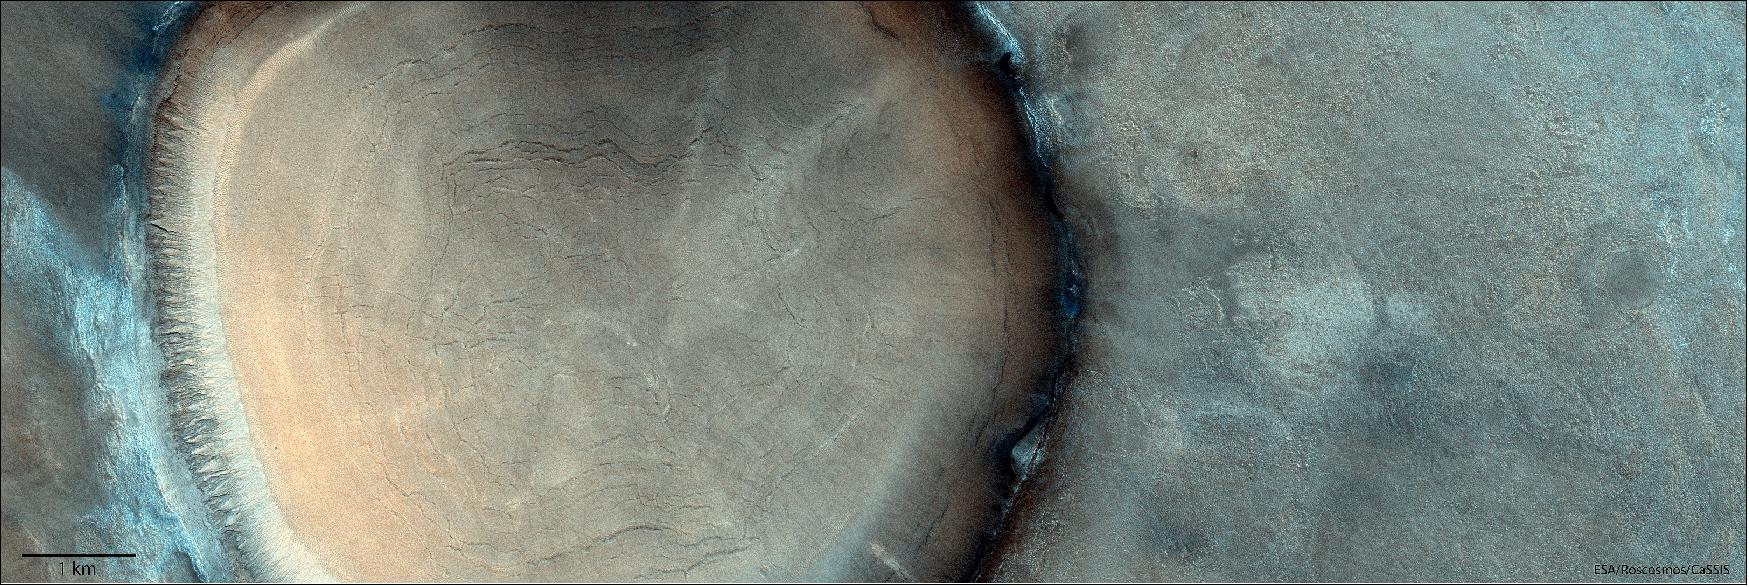 Figure 10: The image was taken by the CaSSIS camera onboard the ESA/Roscosmos ExoMars Trace Gas Orbiter (TGO) on 13 June 2021 in the vast northern plains of Acidalia Planitia, centred at 51.9ºN/326.7ºE (image credit: ESA/Roscosmos/CaSSIS, CC BY-SA 3.0 IGO)